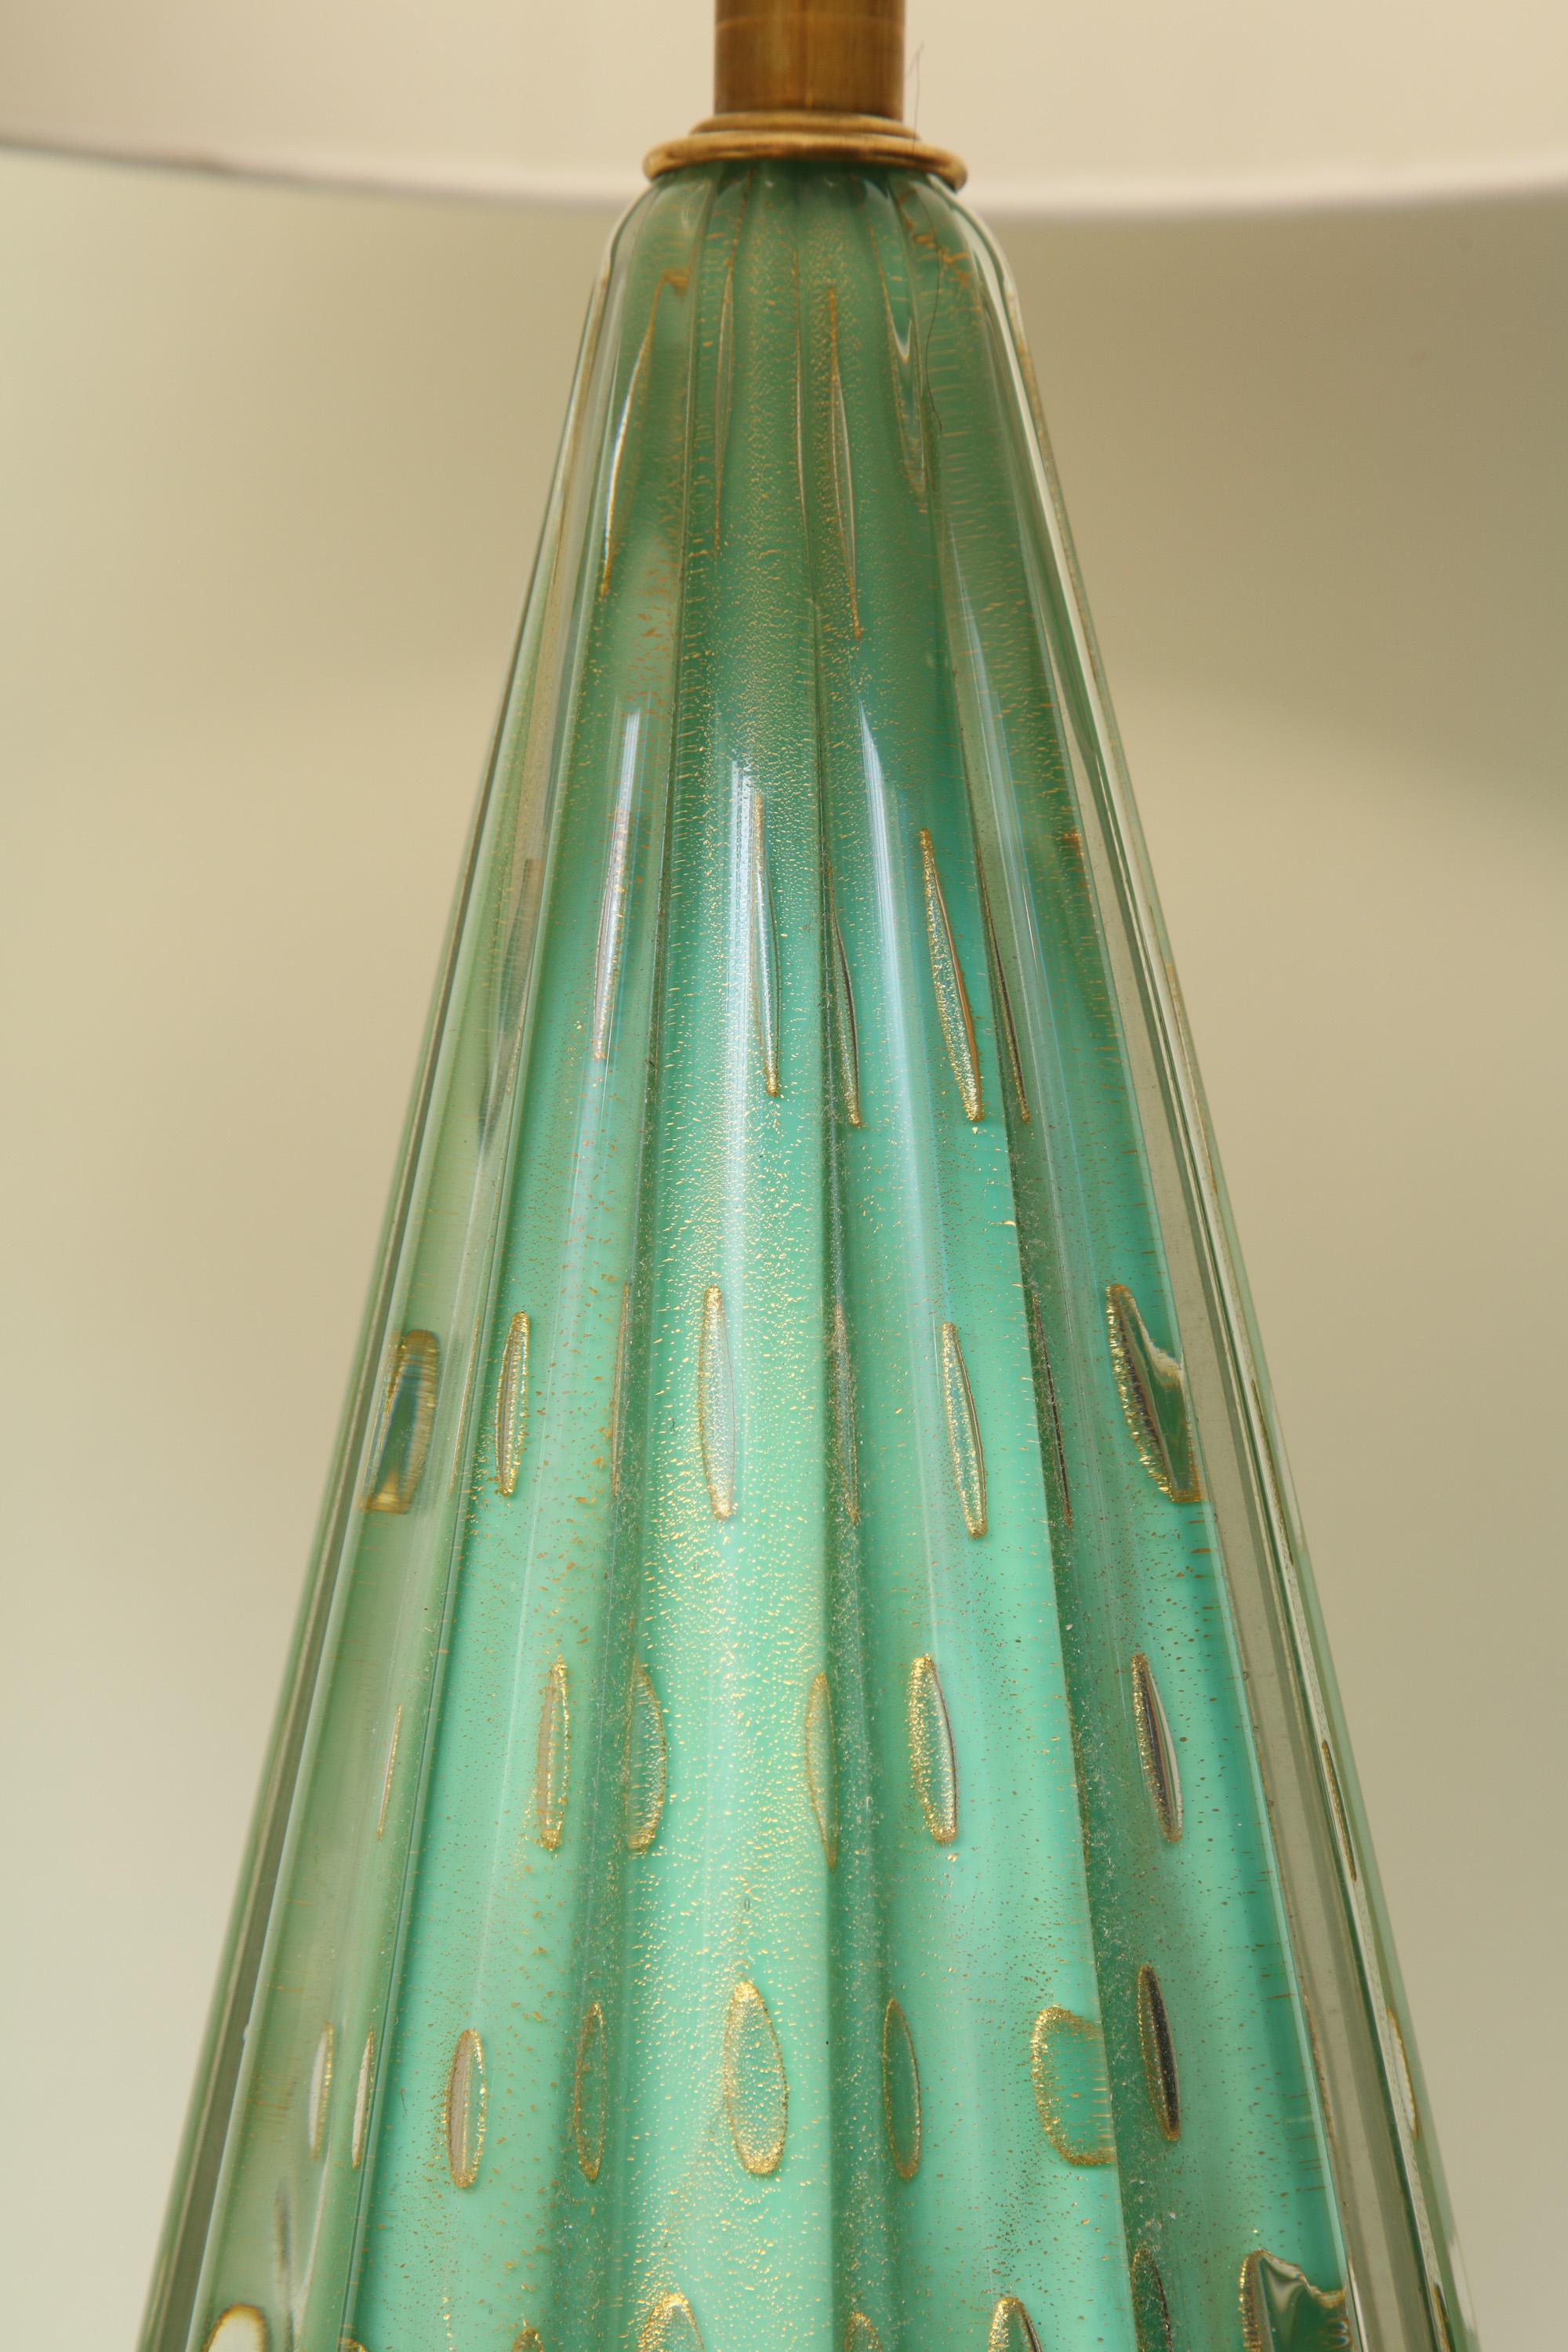 Seguso Table Lamp Murano Art Glass Mid-Century Modern, Italy, 1950s In Good Condition For Sale In New York, NY